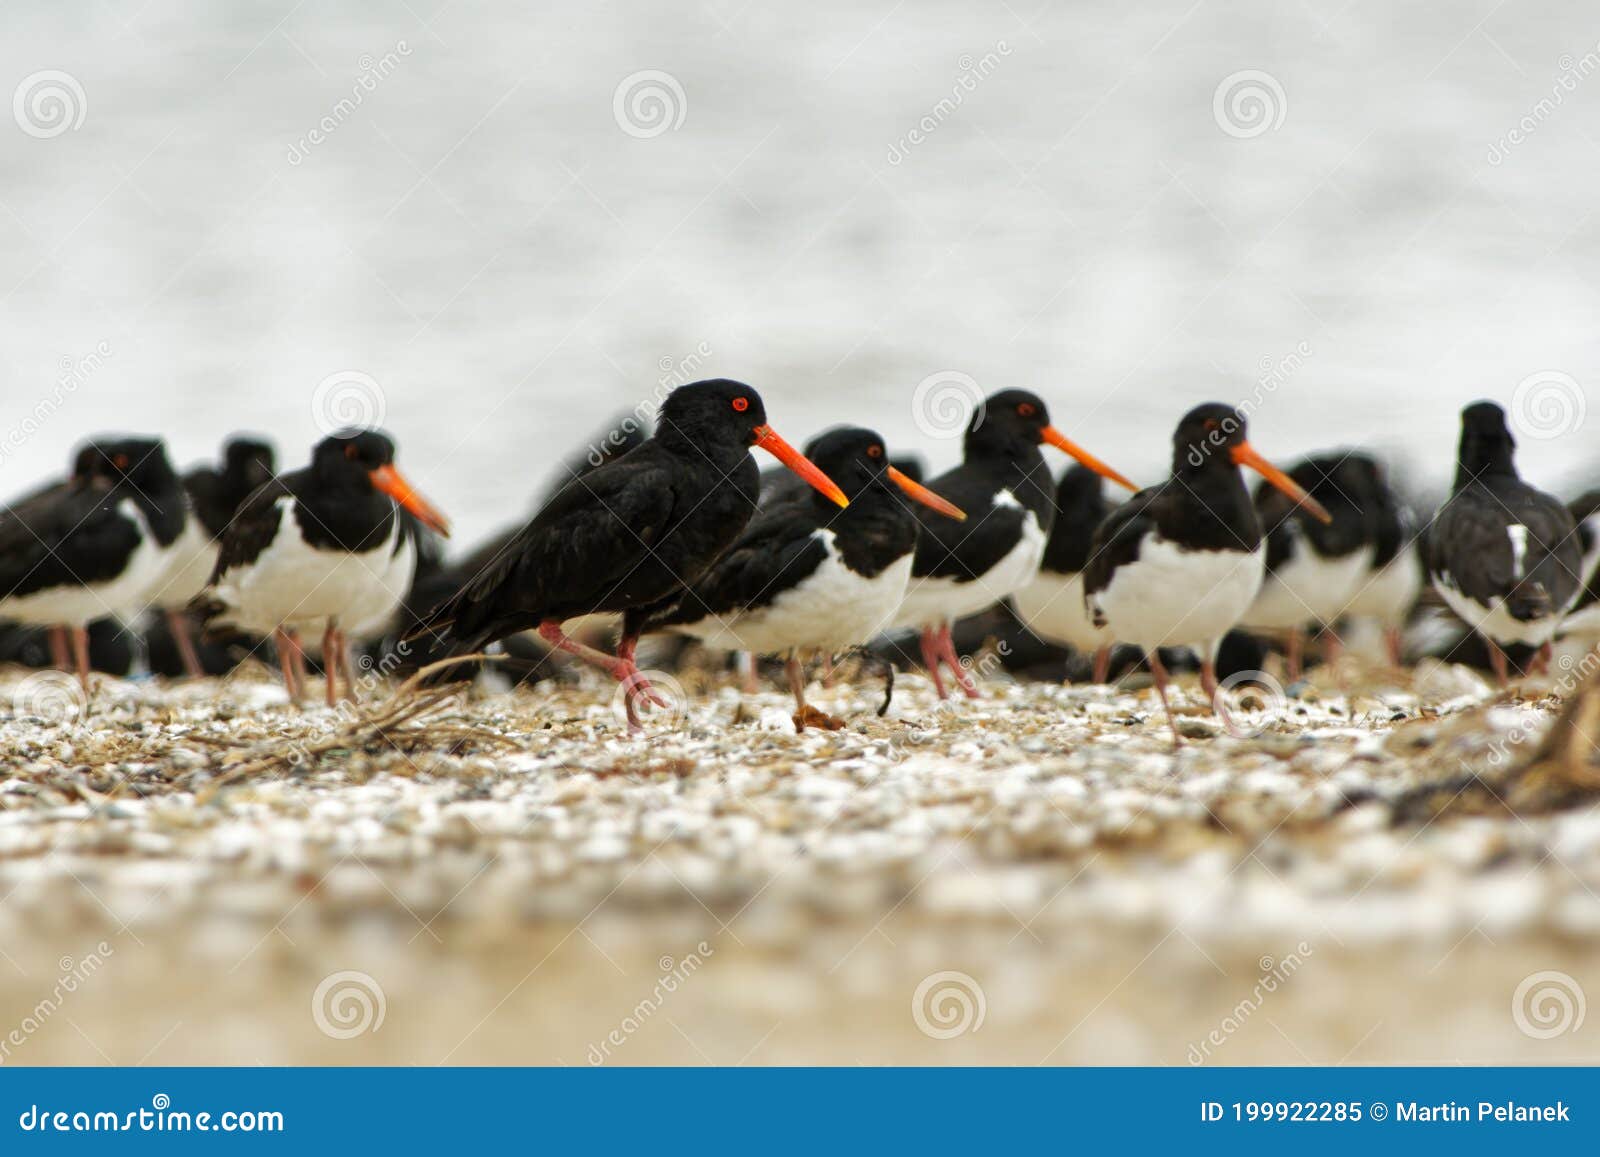 south island oystercatcher - haematopus finschi - torea in maori, one of the two common oystercatchers found in new zealand, black